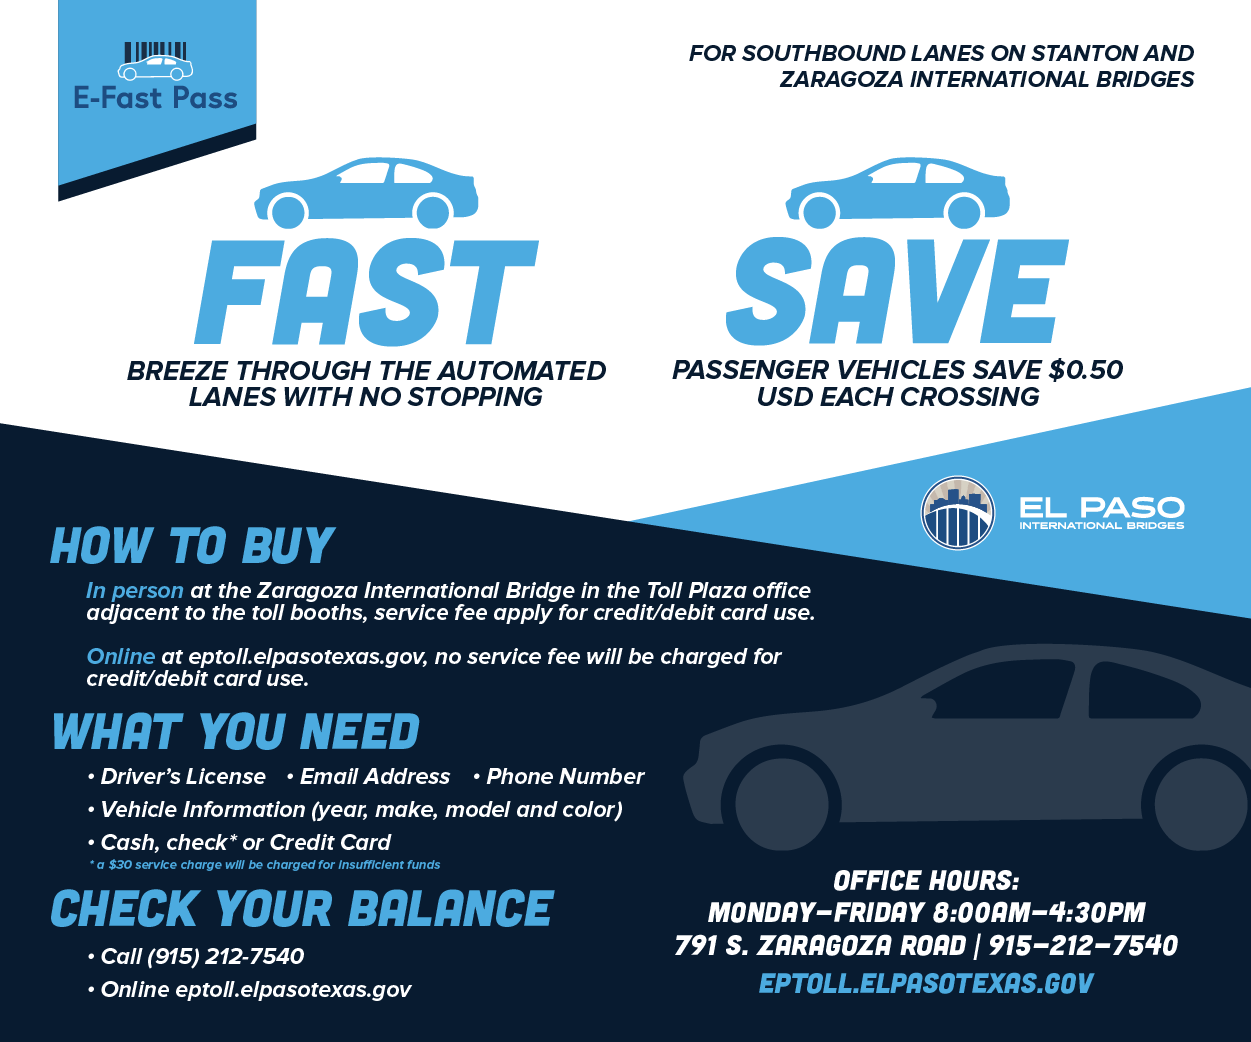 E-Fast Pass for Southbound Lanes on Stanton and Zaragoza International Bridges. Fast: Breeze through the automated lanes with no stopping. Save: Passenger vehicles save $0.50 USD each crossing. How to buy: in person at the Zaragoza International Bridge in the Toll Plaza office adjacent to the toll booths, service fee apply for credit/debit card use. Online at eptoll.elpasotexas.gov, no service fee will be charged for credit/debit card use. What you need: Drivers License; Email Address; Phone Number; Vehicle Information (year, make, model, and color); Cash, check* or Credit Card *a $30 service charge will be charged for Insufficient funds. Check your balance: Call (915) 212-7540 or Online at eptoll.elpasotexas.gov. Office Hours: Monday - Friday 8 a.m. to 4:30 p.m. Location: 791 S. Zaragoza Road. (915) 212-7540. EPTOLL.ELPASOTEXAS.GOV EL PASO INTERNATIONAL BRIDGES